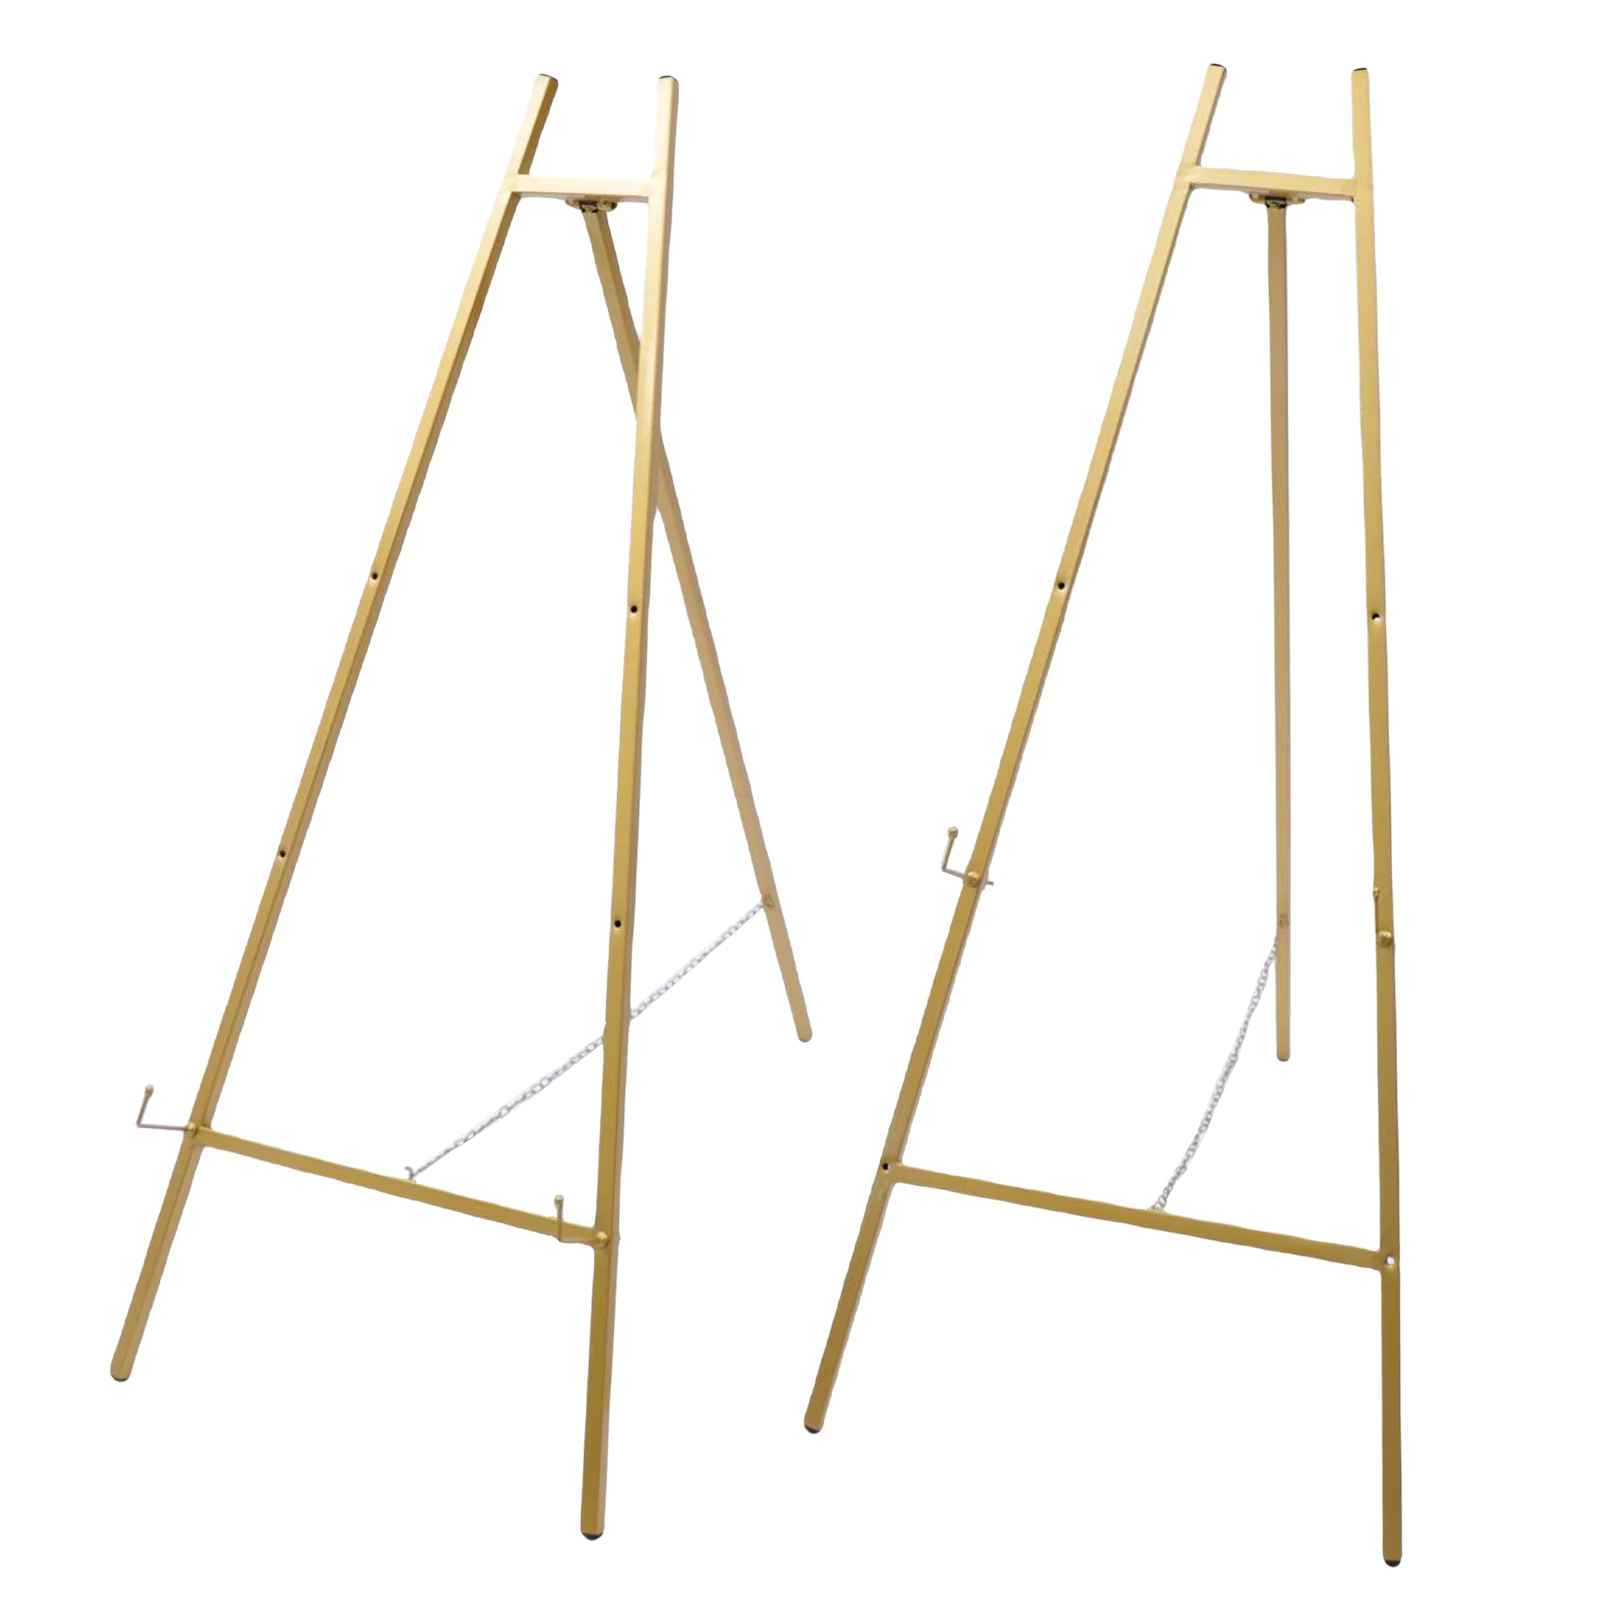 Steel Pipe Portable Floor Easel Stand for Decorative Display